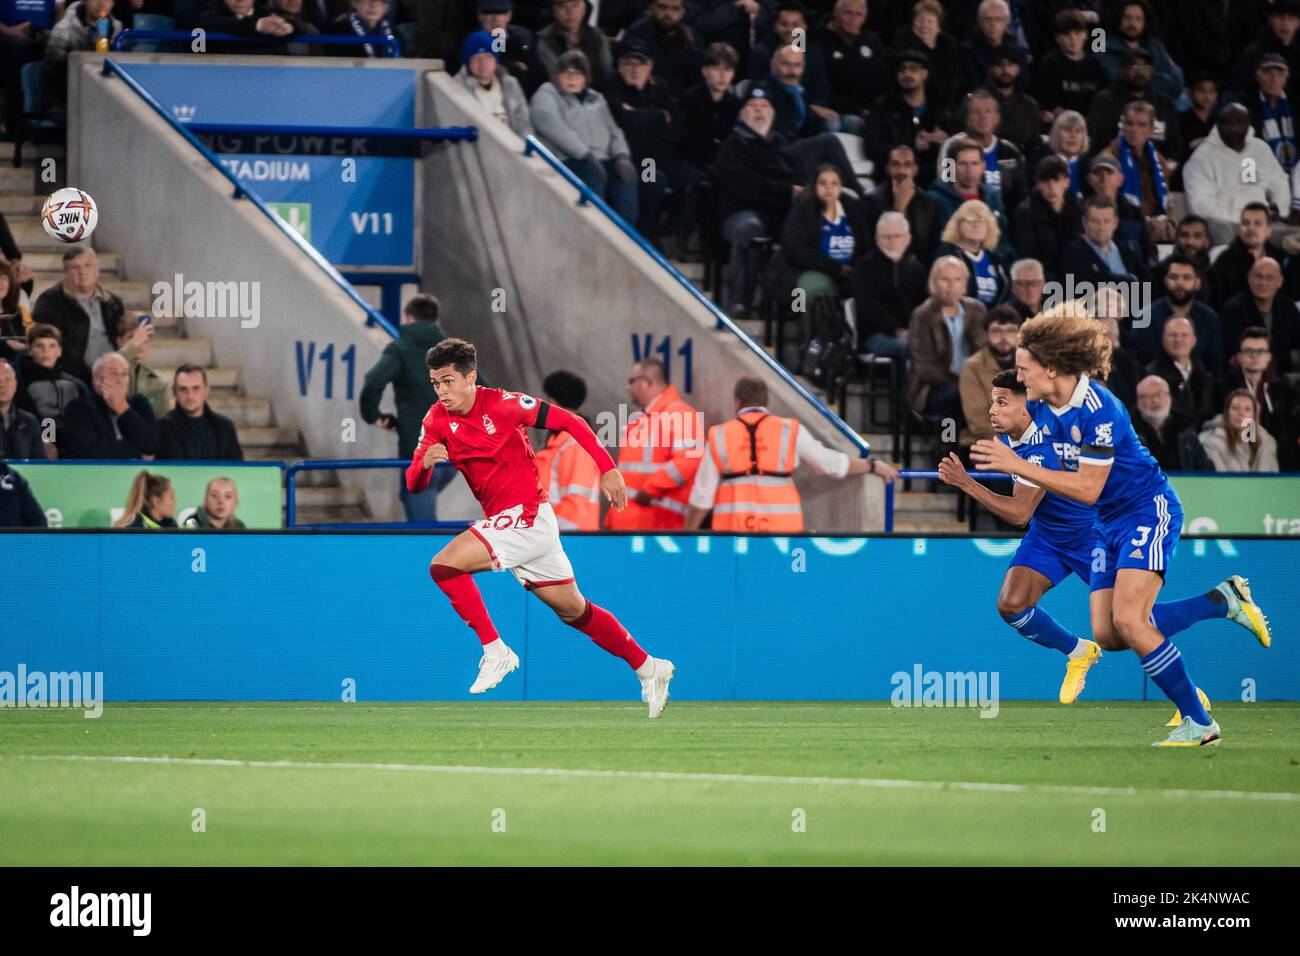 Brennan Johnson #20 of Nottingham Forest chases down a through ball during the Premier League match Leicester City vs Nottingham Forest at King Power Stadium, Leicester, United Kingdom, 3rd October 2022  (Photo by Ritchie Sumpter/News Images) Stock Photo